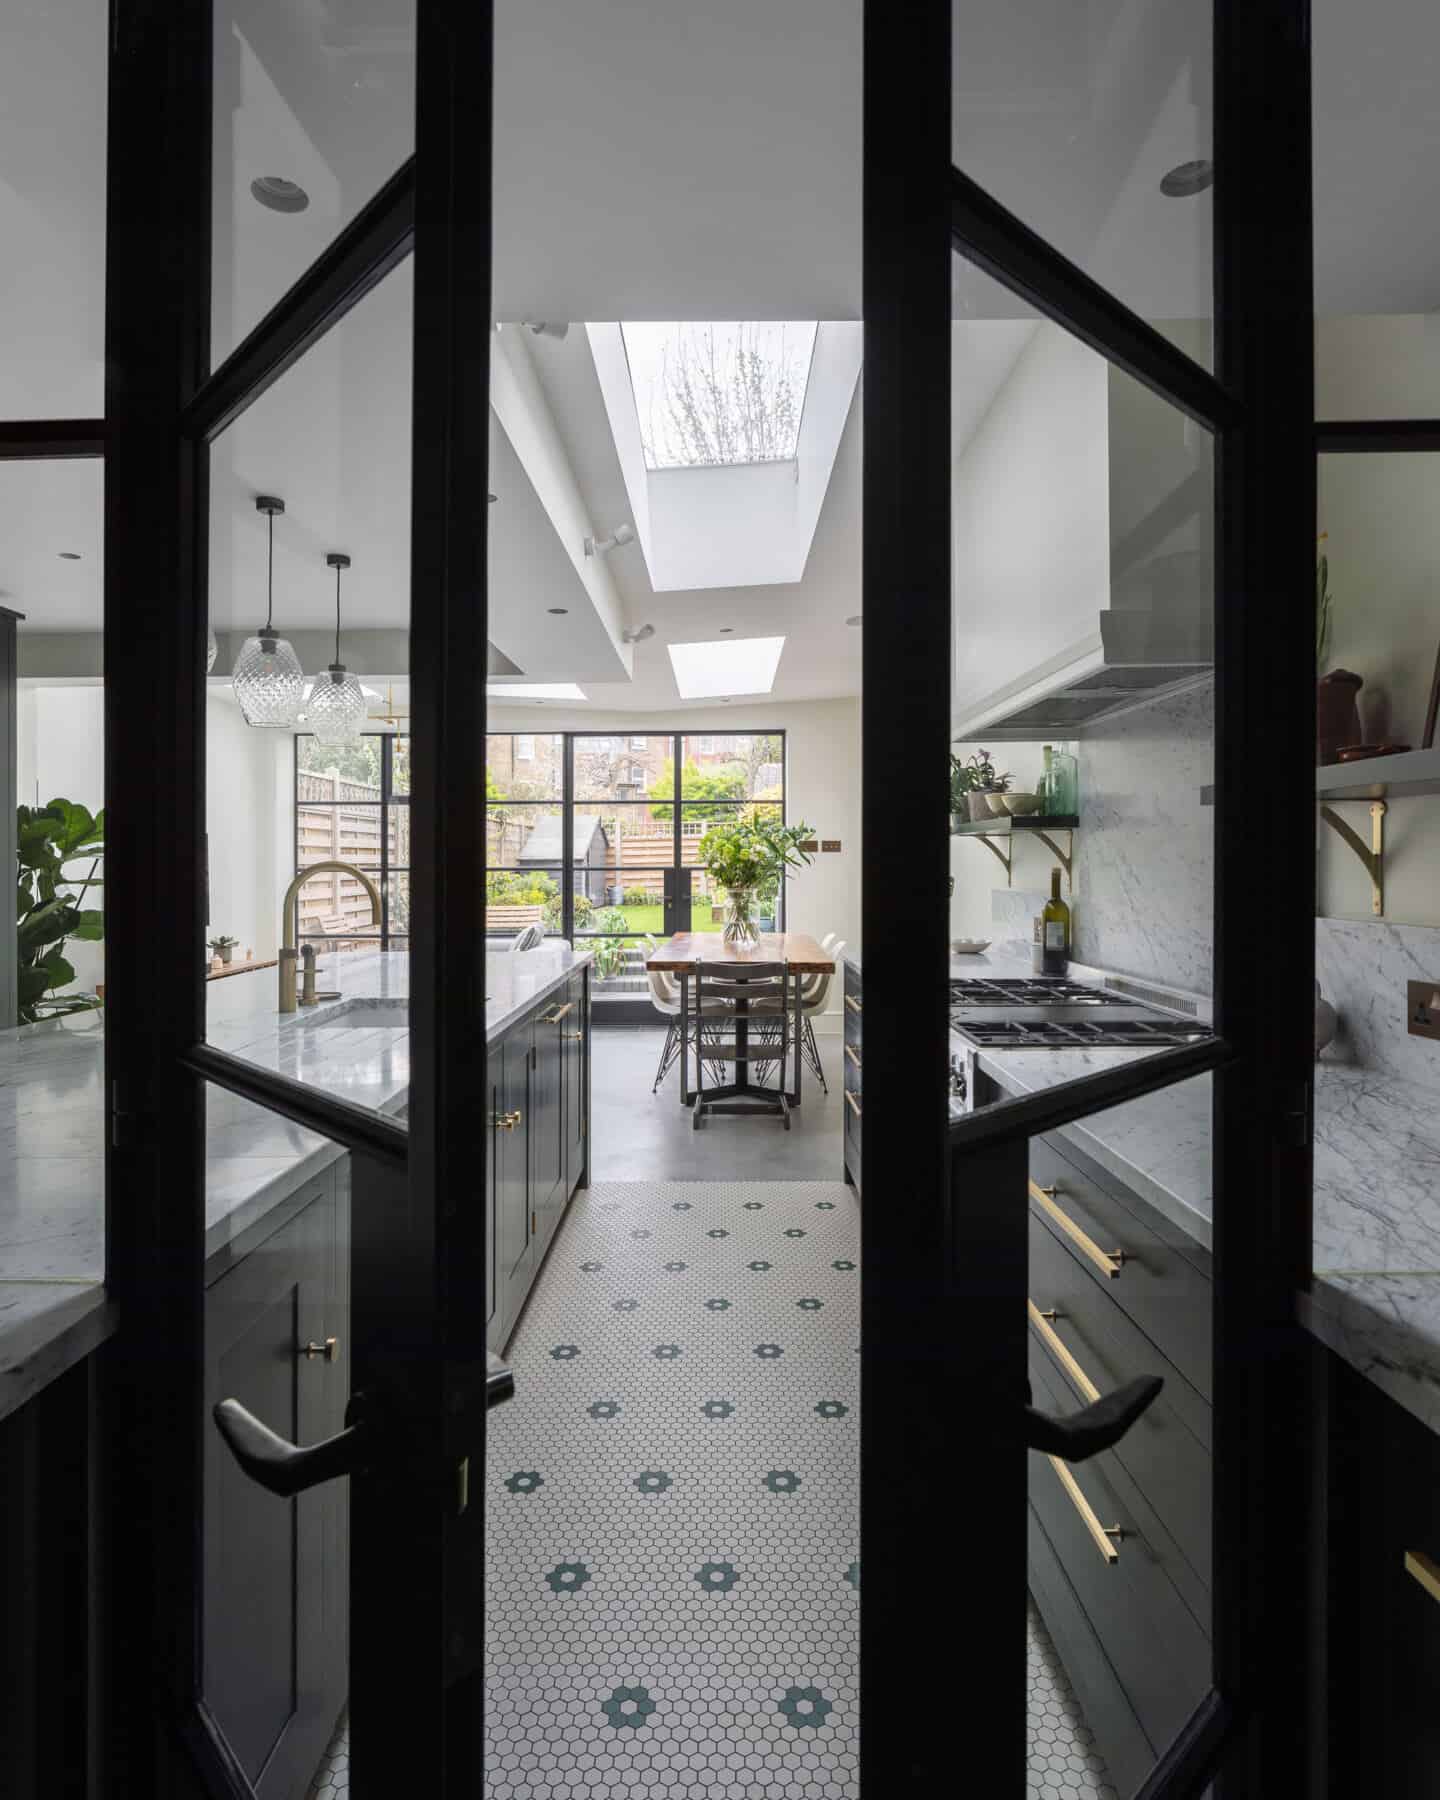 A view of a kitchen through to a dining area and out to the garden